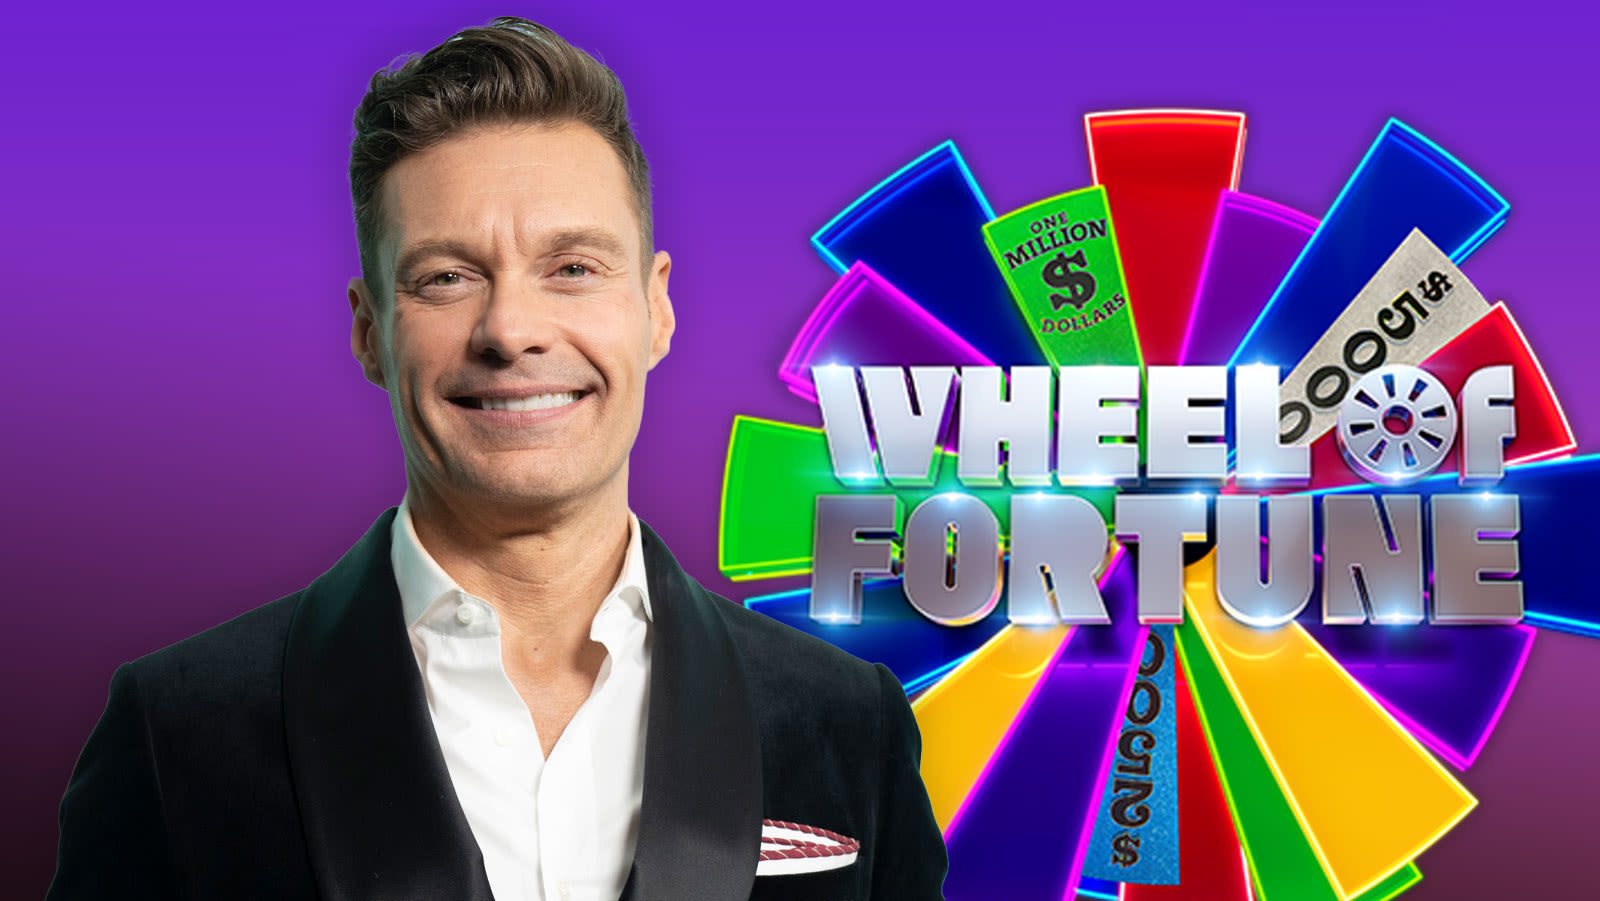 Ryan Seacrest On First Day Of ‘Wheel Of Fortune’ Filming: “My Heart’s Pounding I’m So Excited”